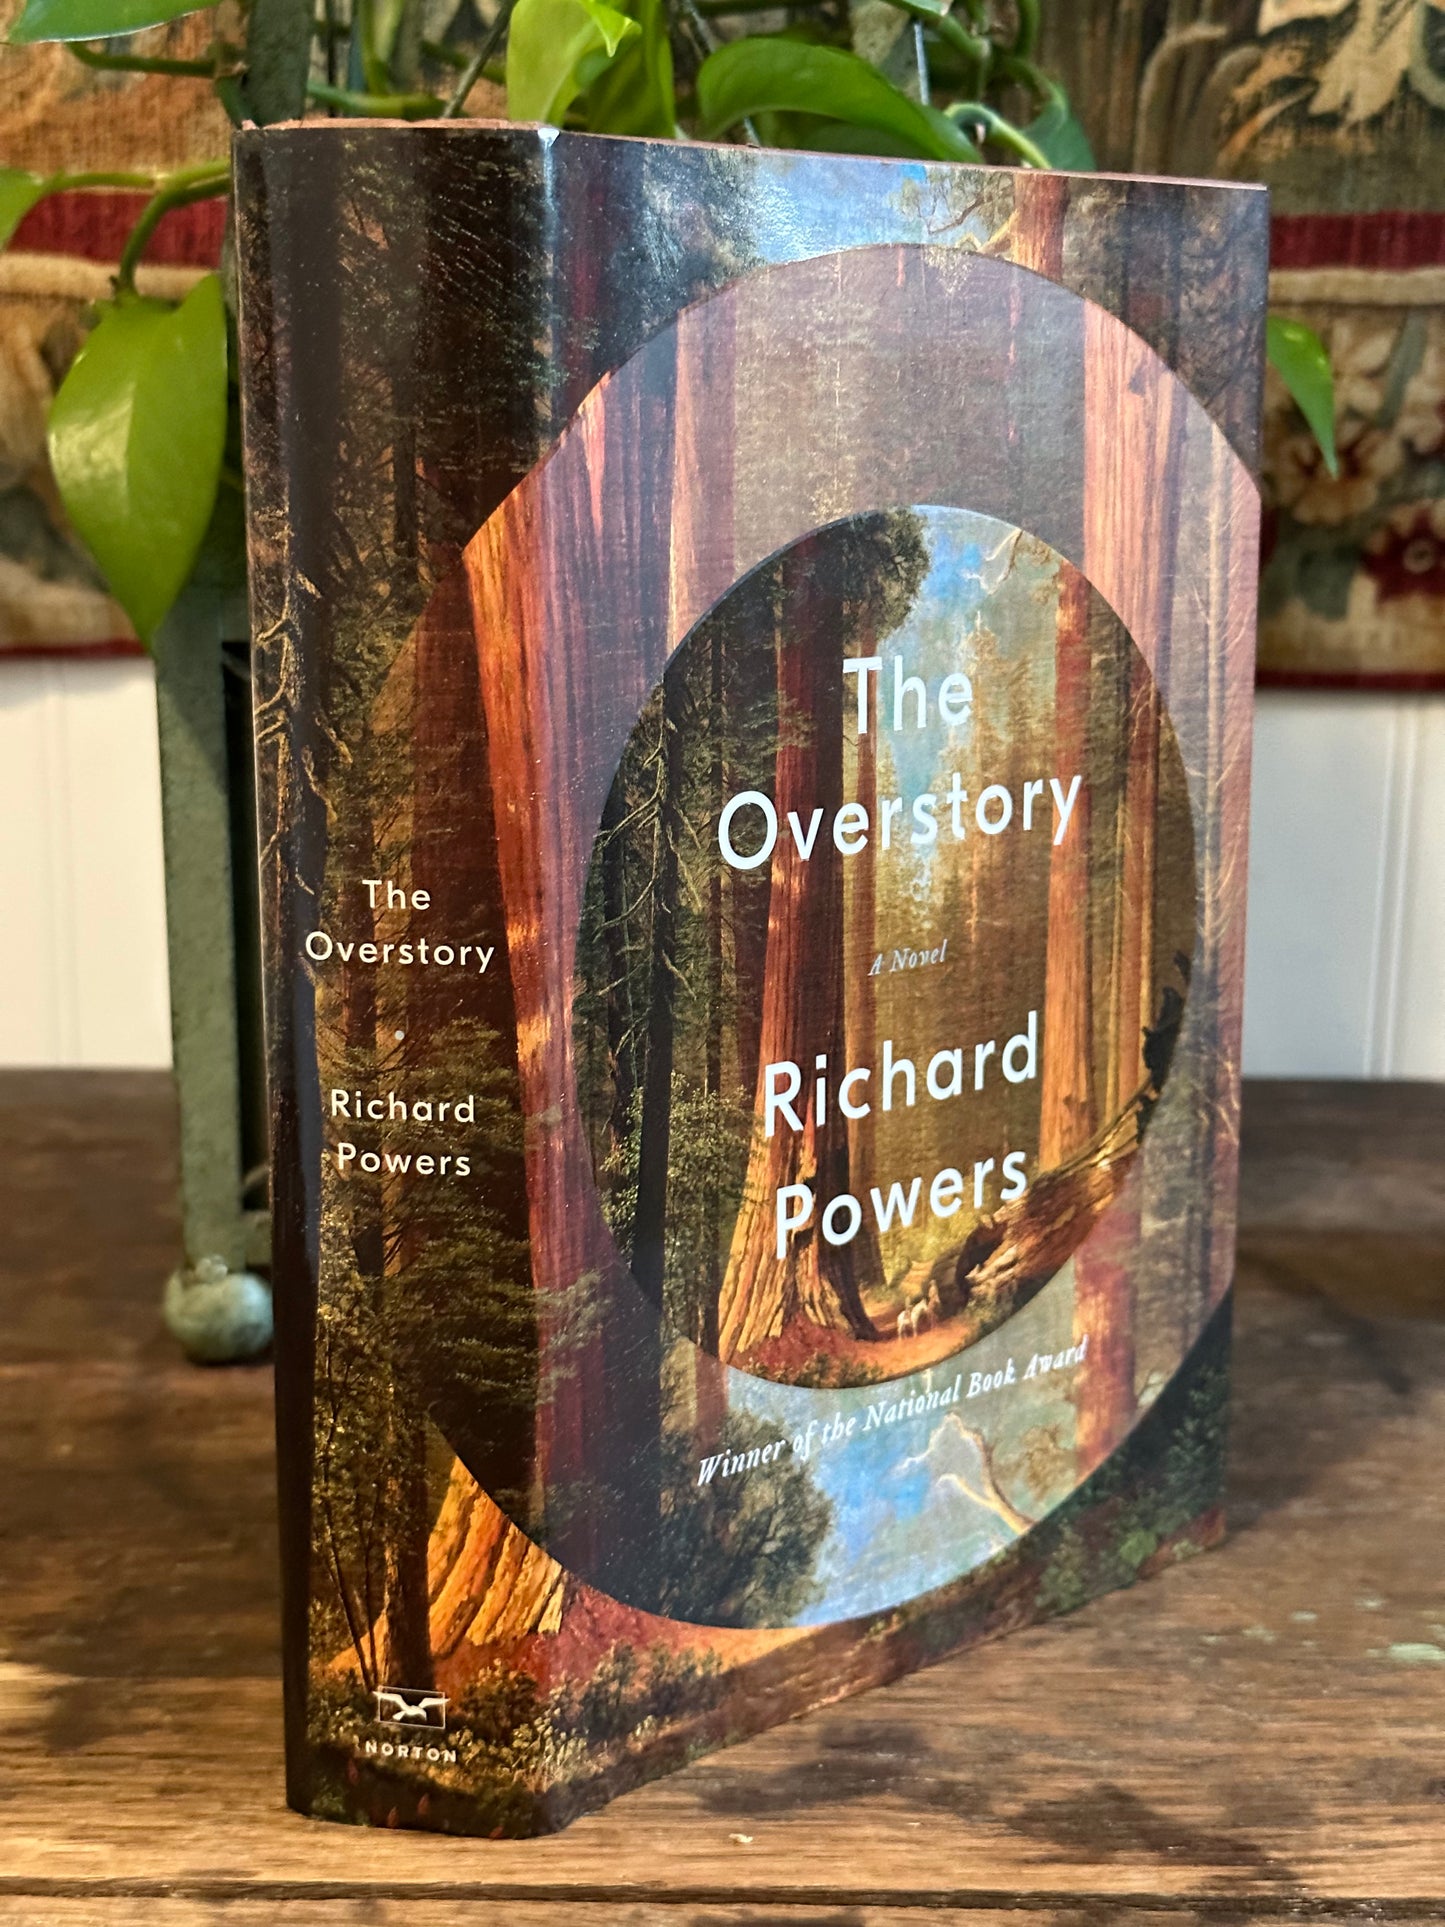 The Overstory by Richard Powers (First Edition)